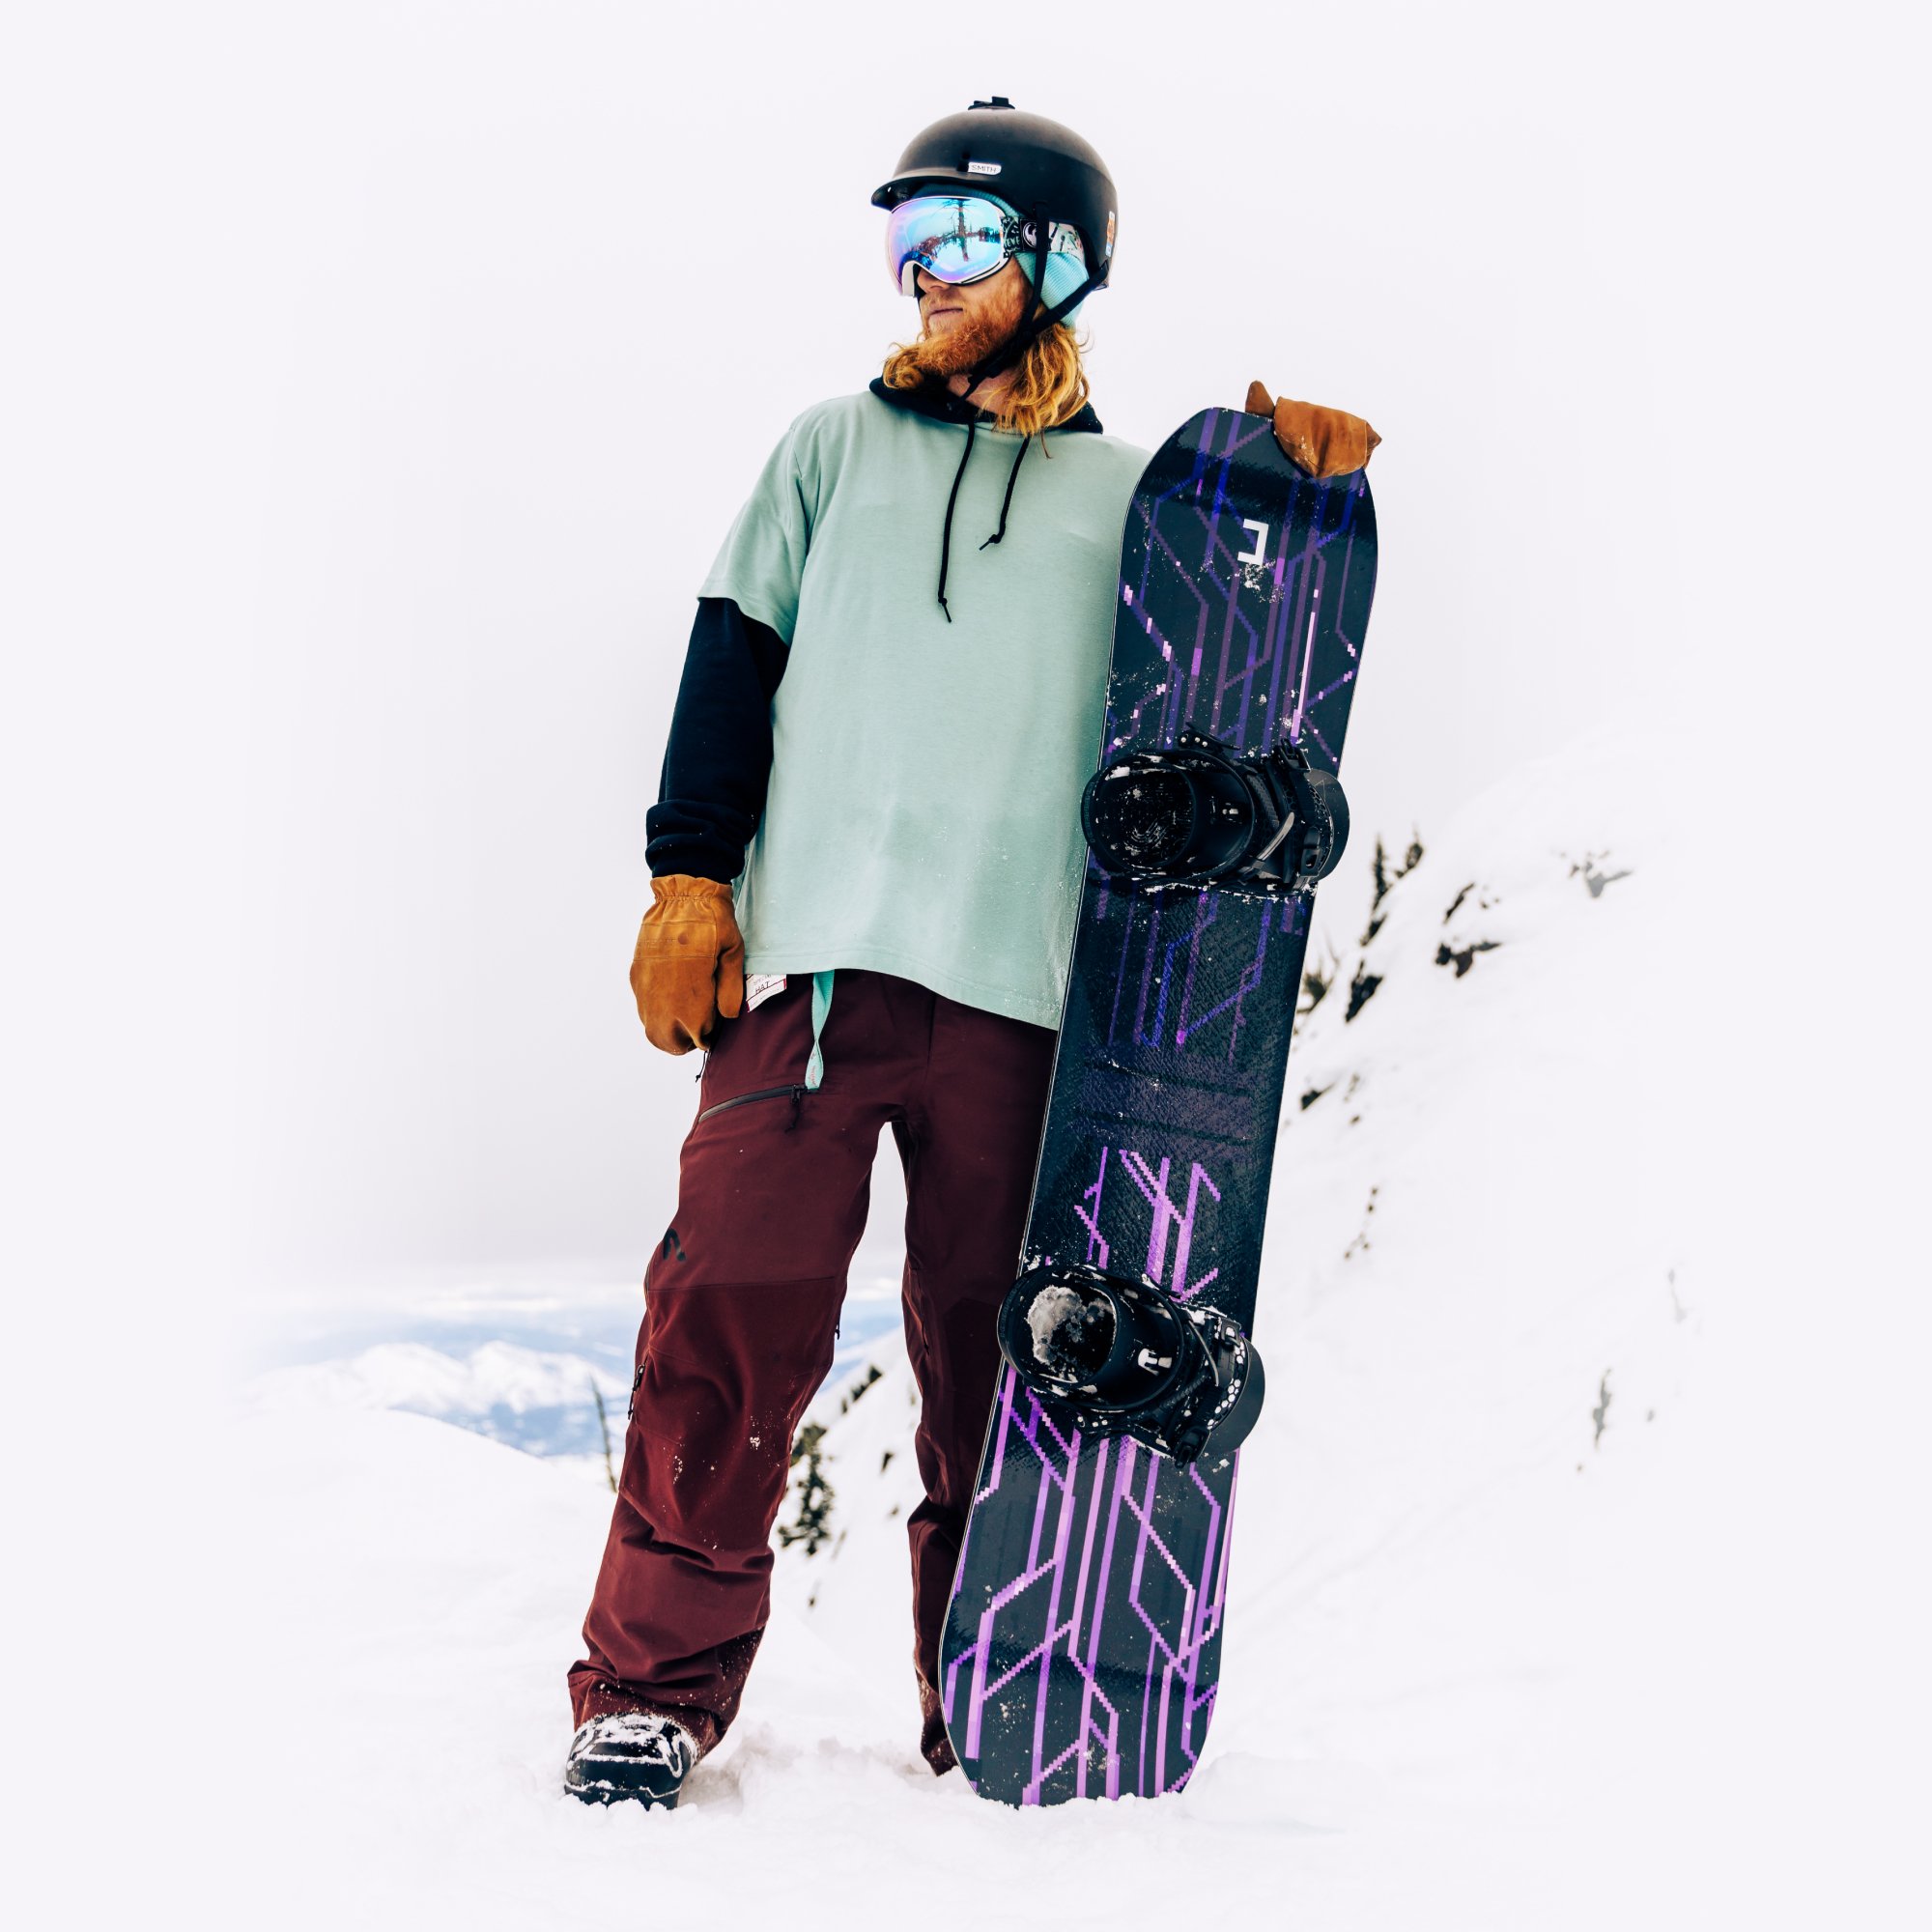 Image of a Jadu snowboard held by a snowboarder